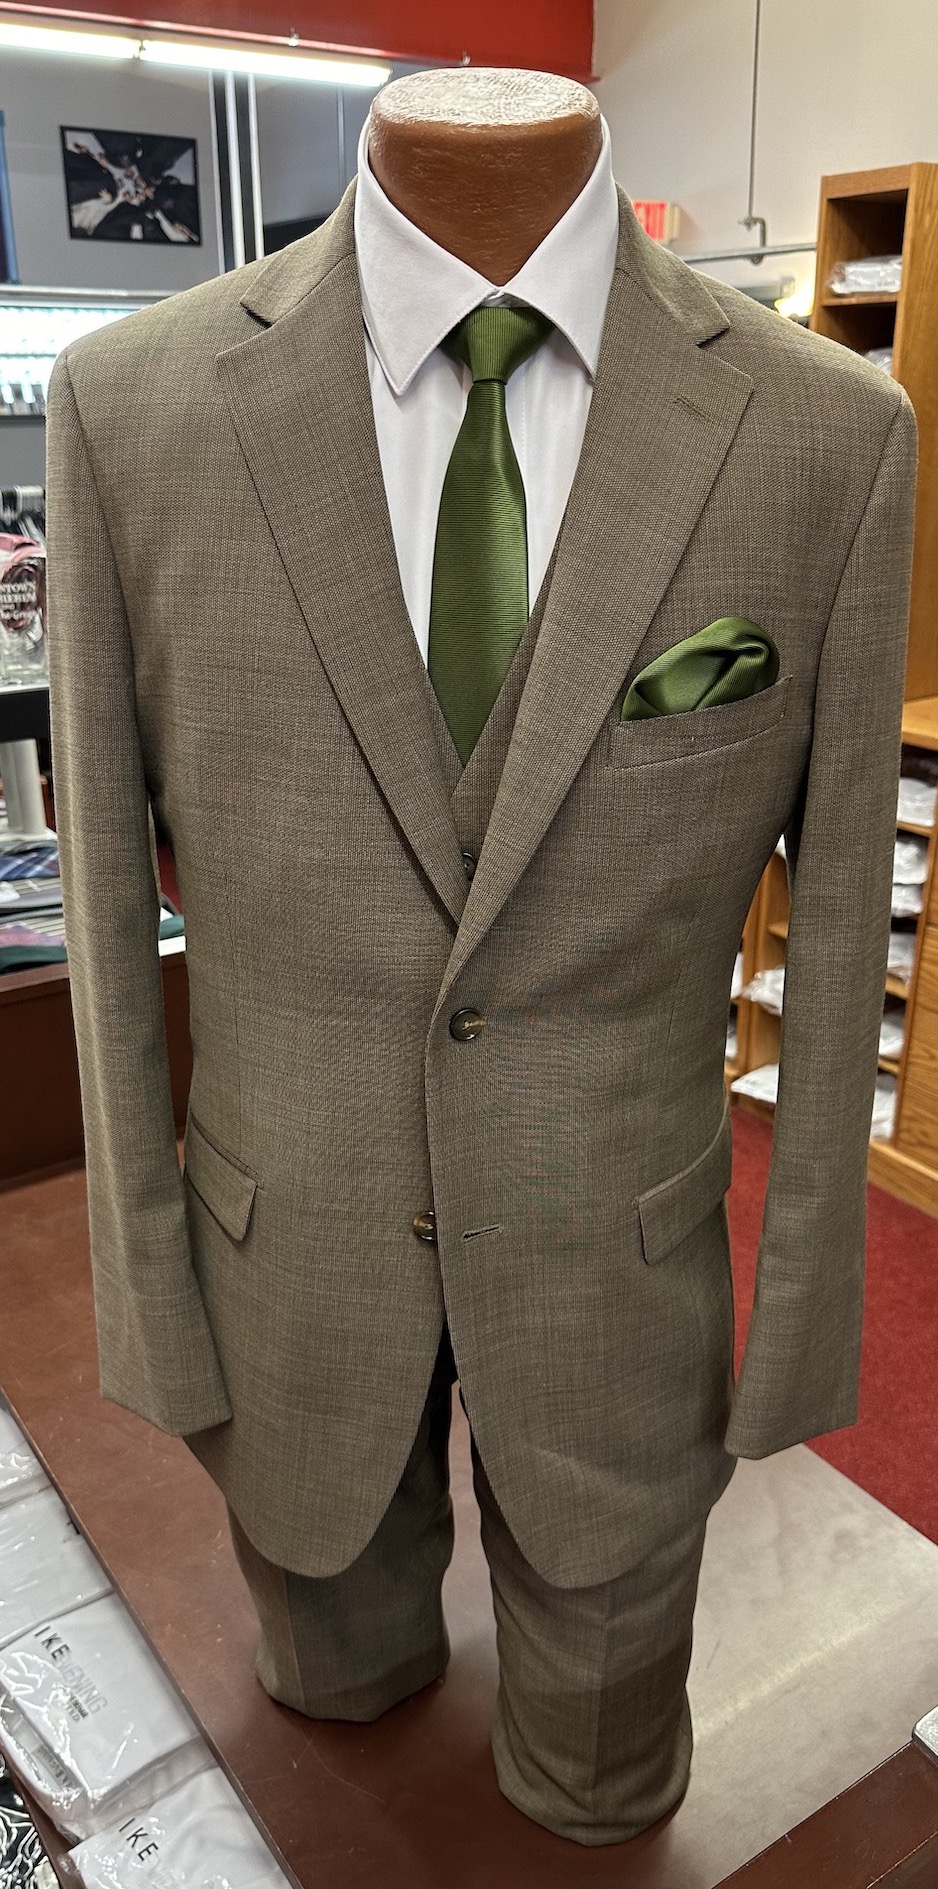 brown suit with green tie and handkerchief